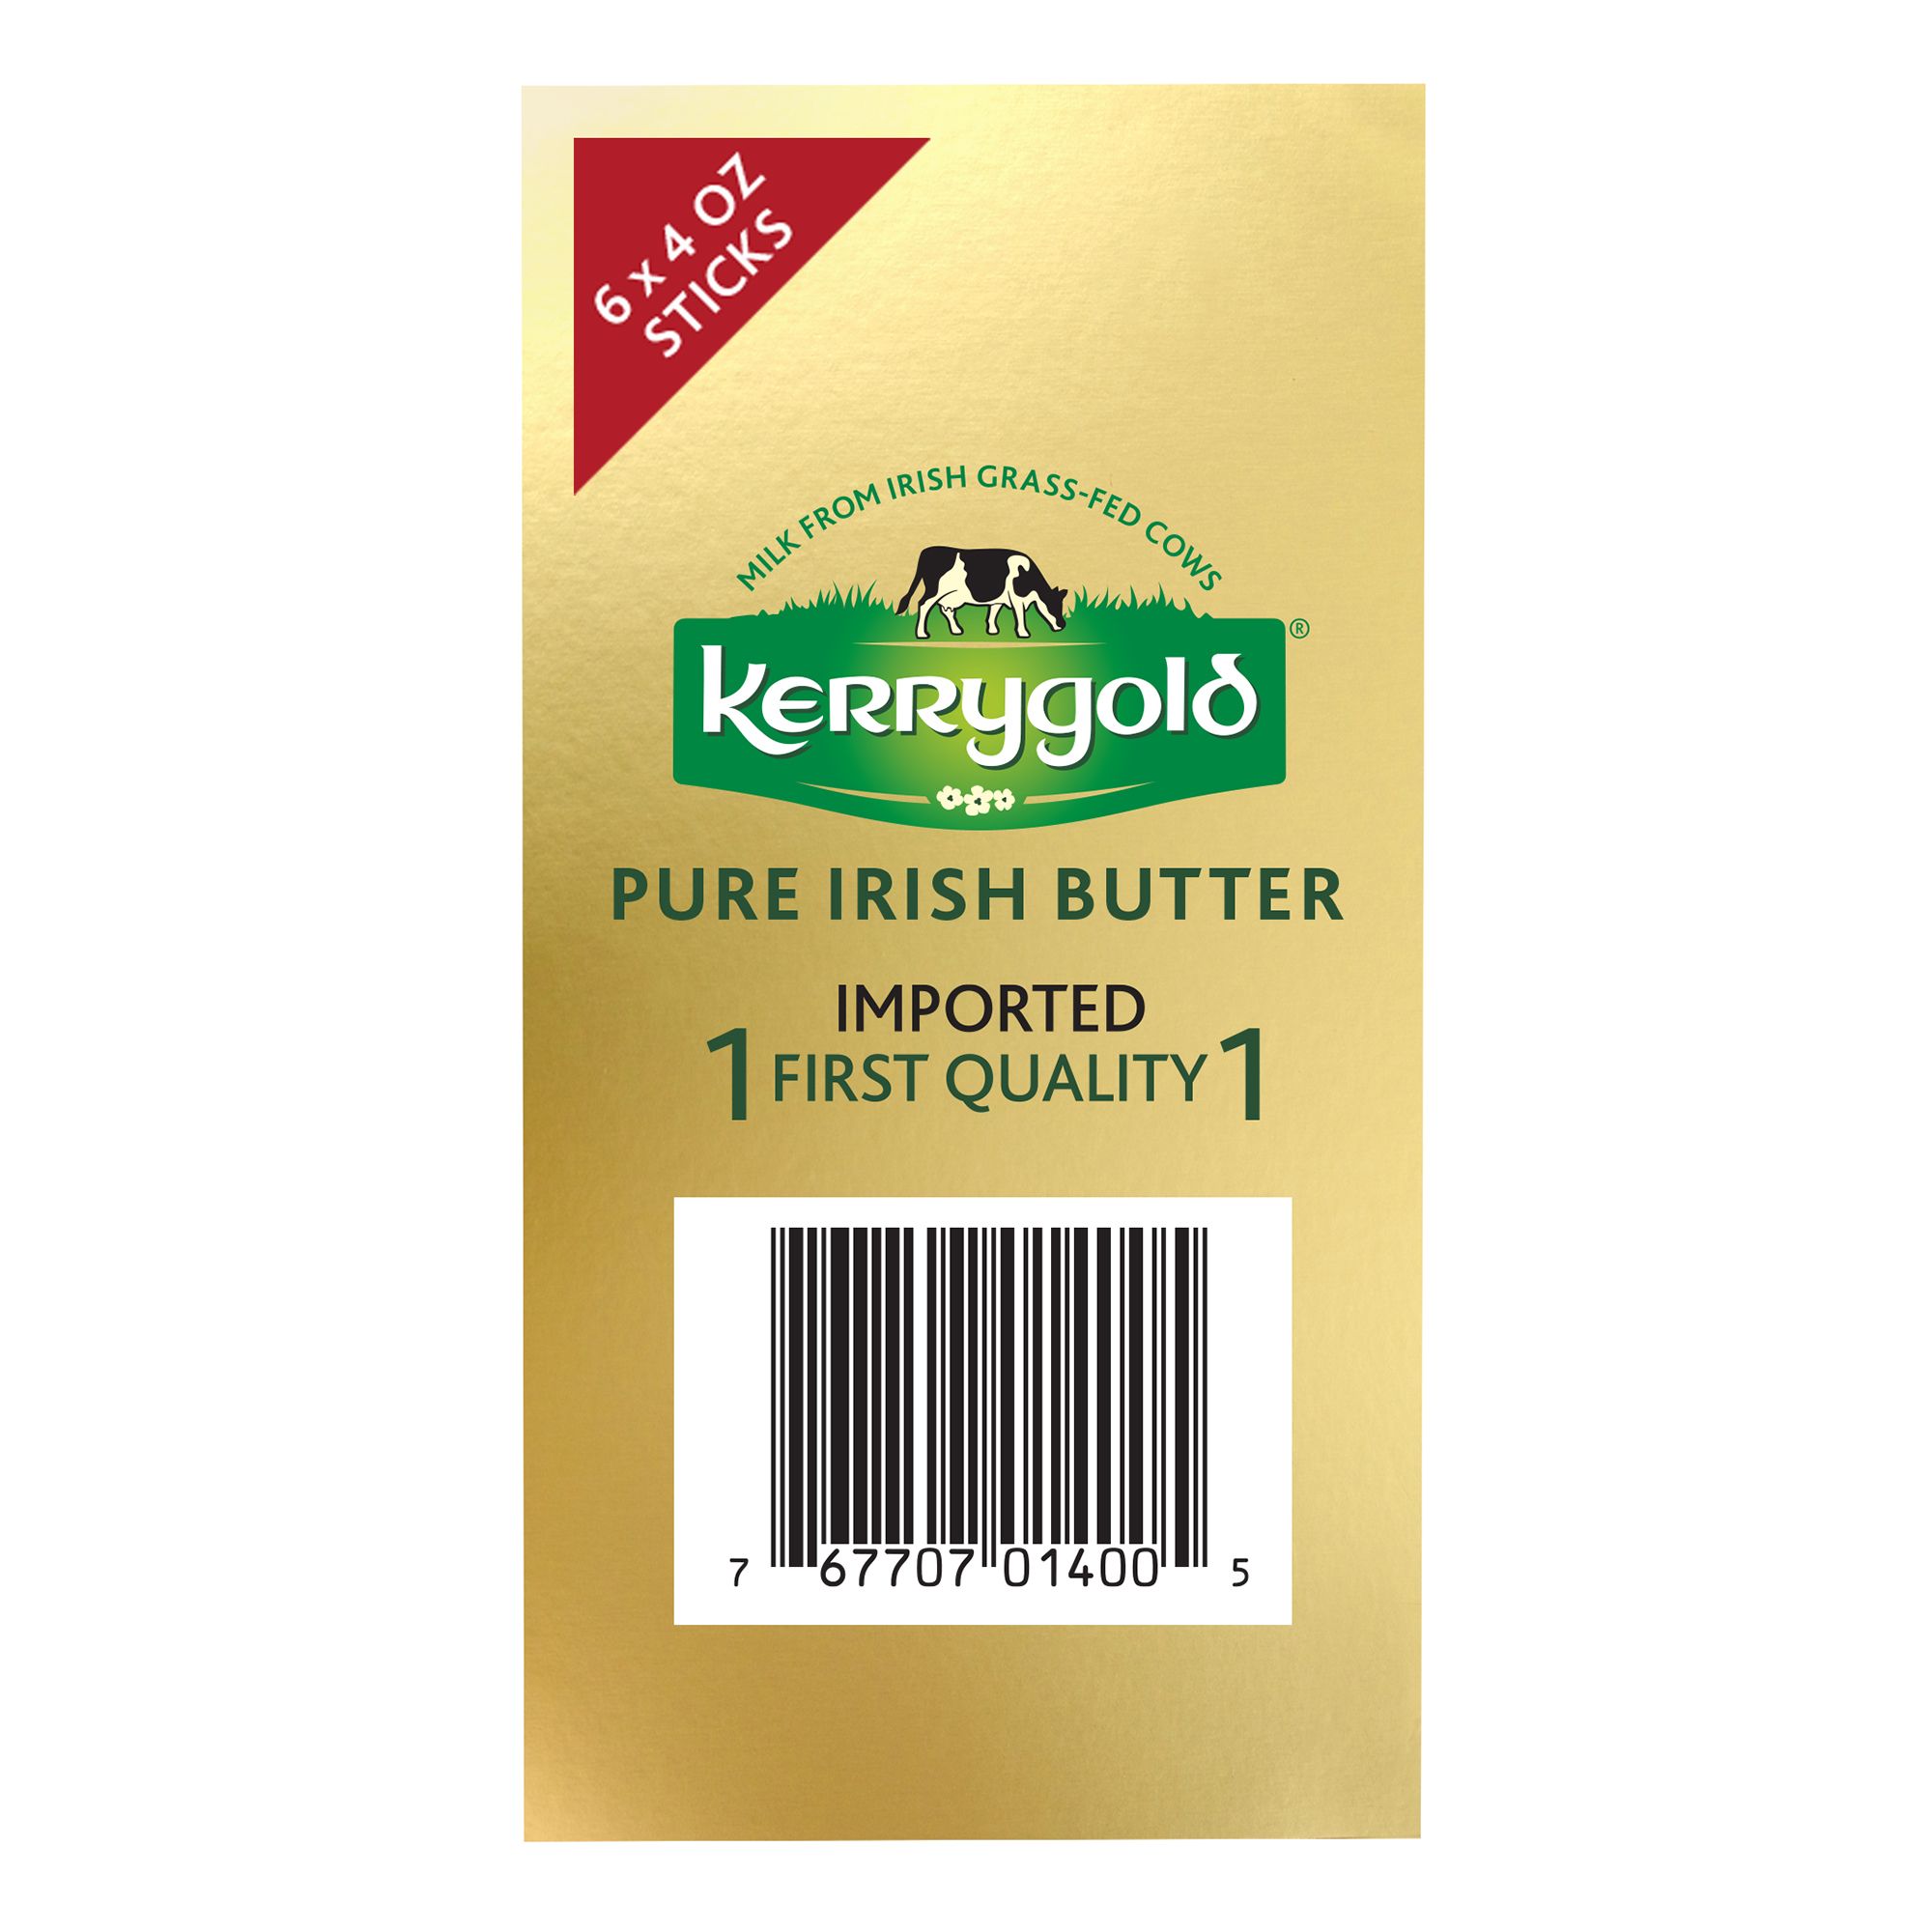 Save on Kerrygold Pure Irish Butter Sticks Salted Grass-fed - 2 ct